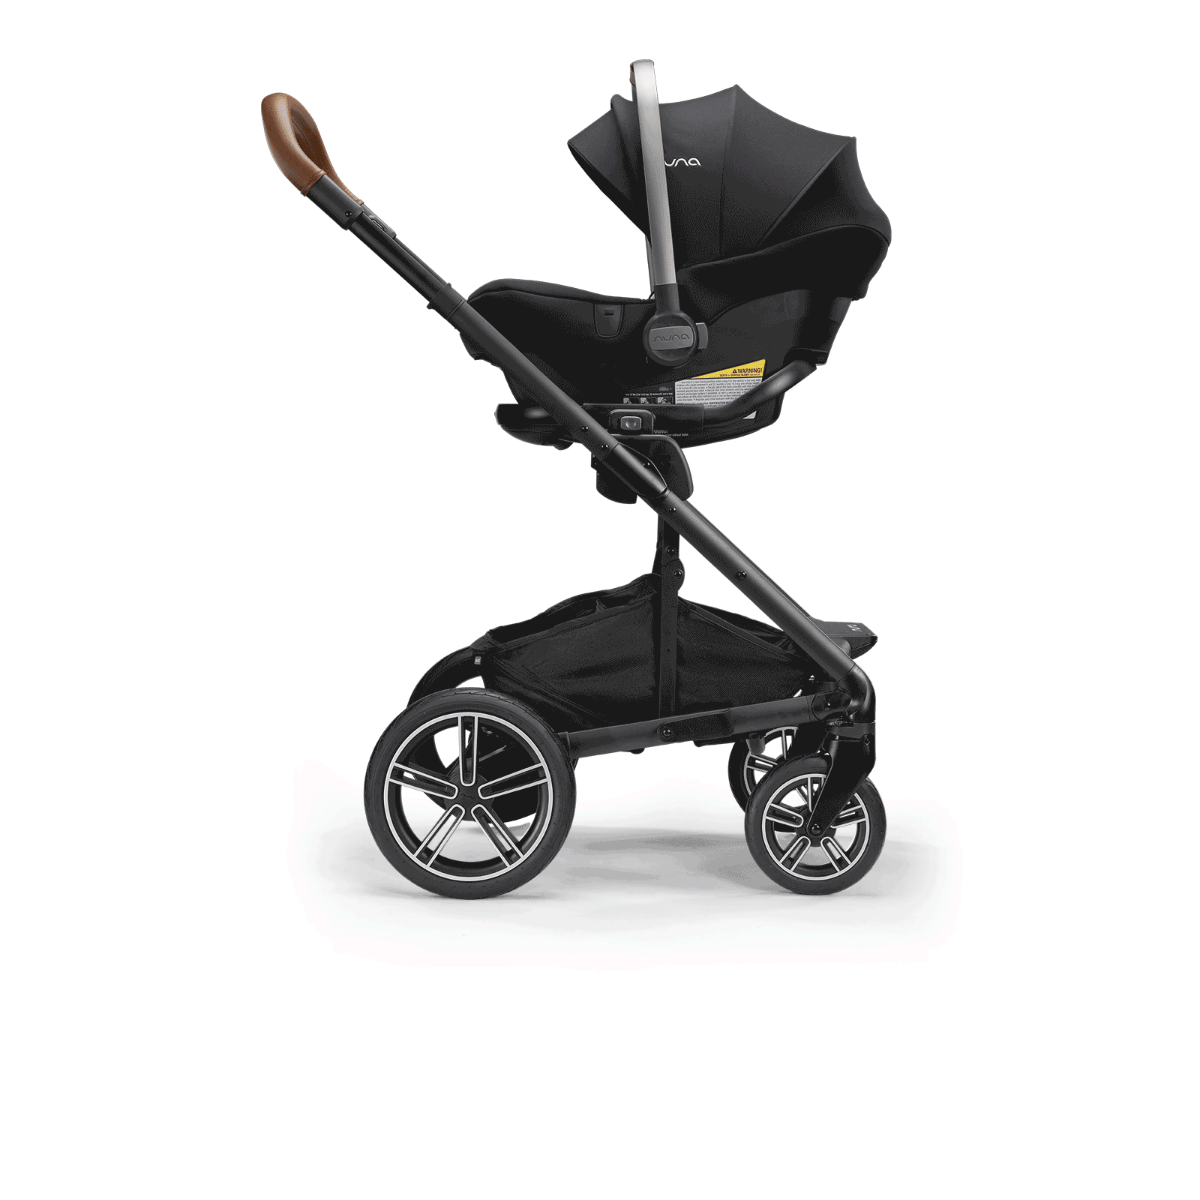 Nuna Nuna MIXX Next with Magnetic Buckle + Pipa RX Infant Car Seat with Relx base Travel System